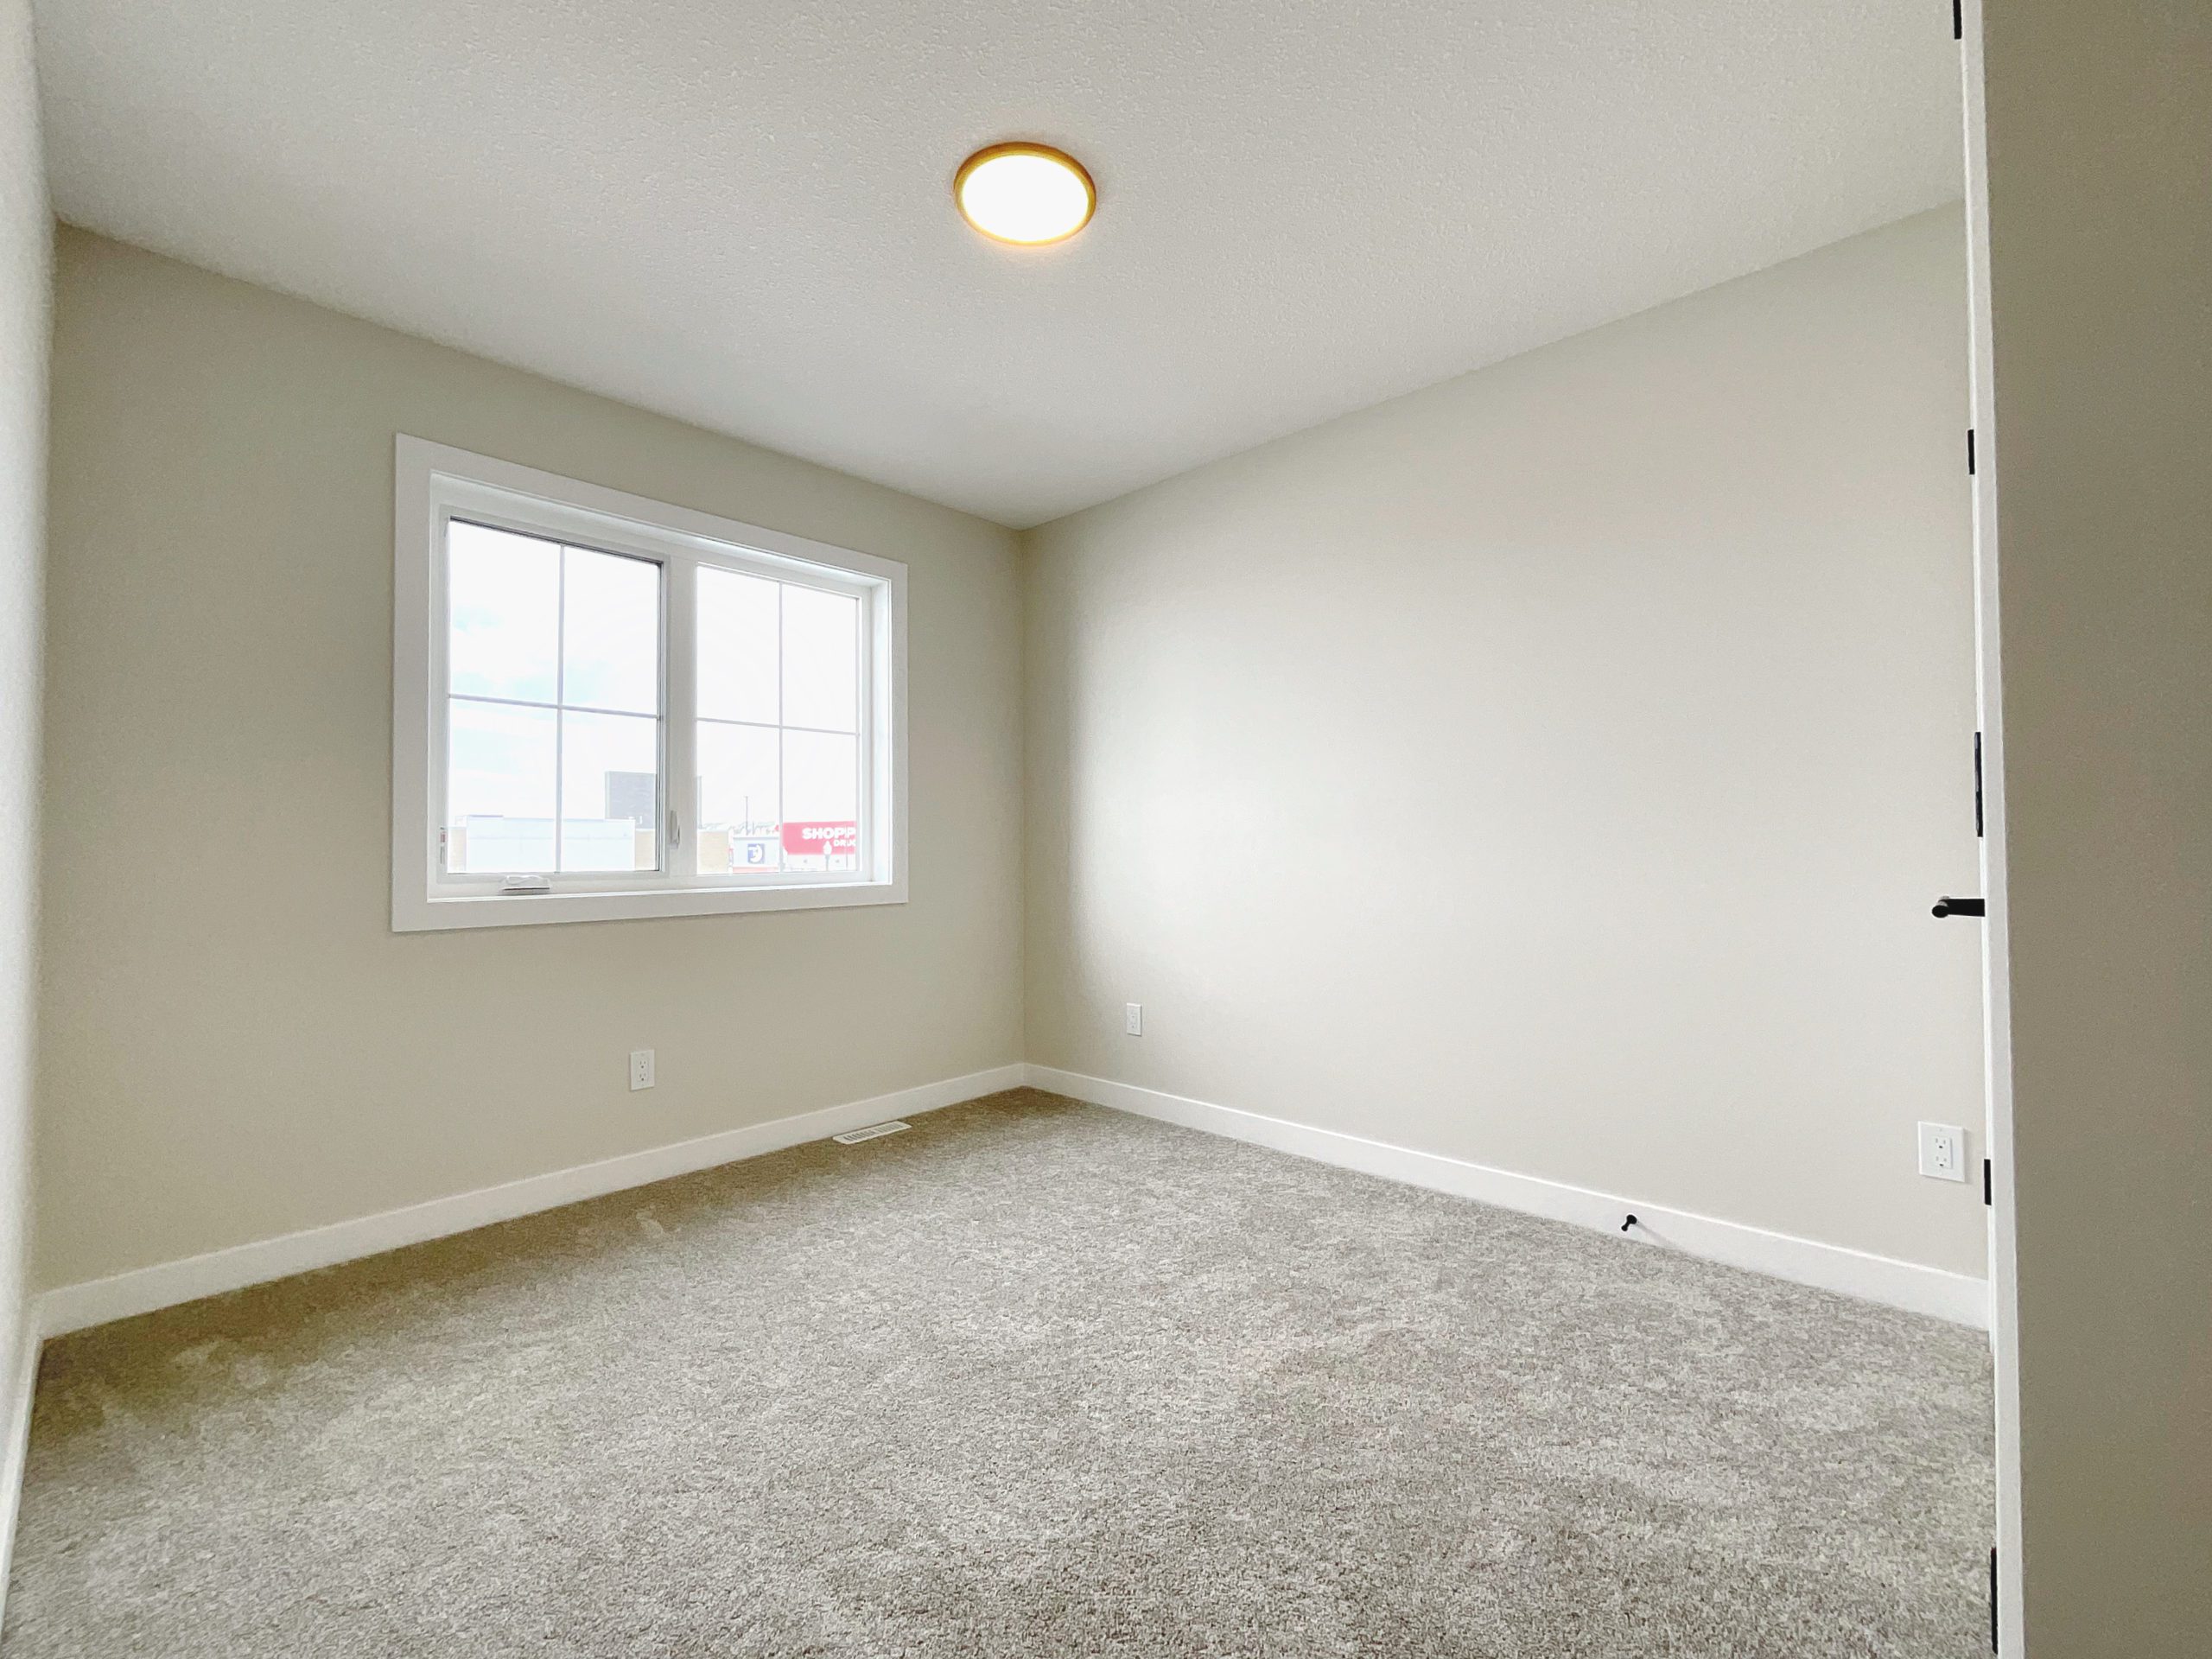 Shows an empty bedroom with window.